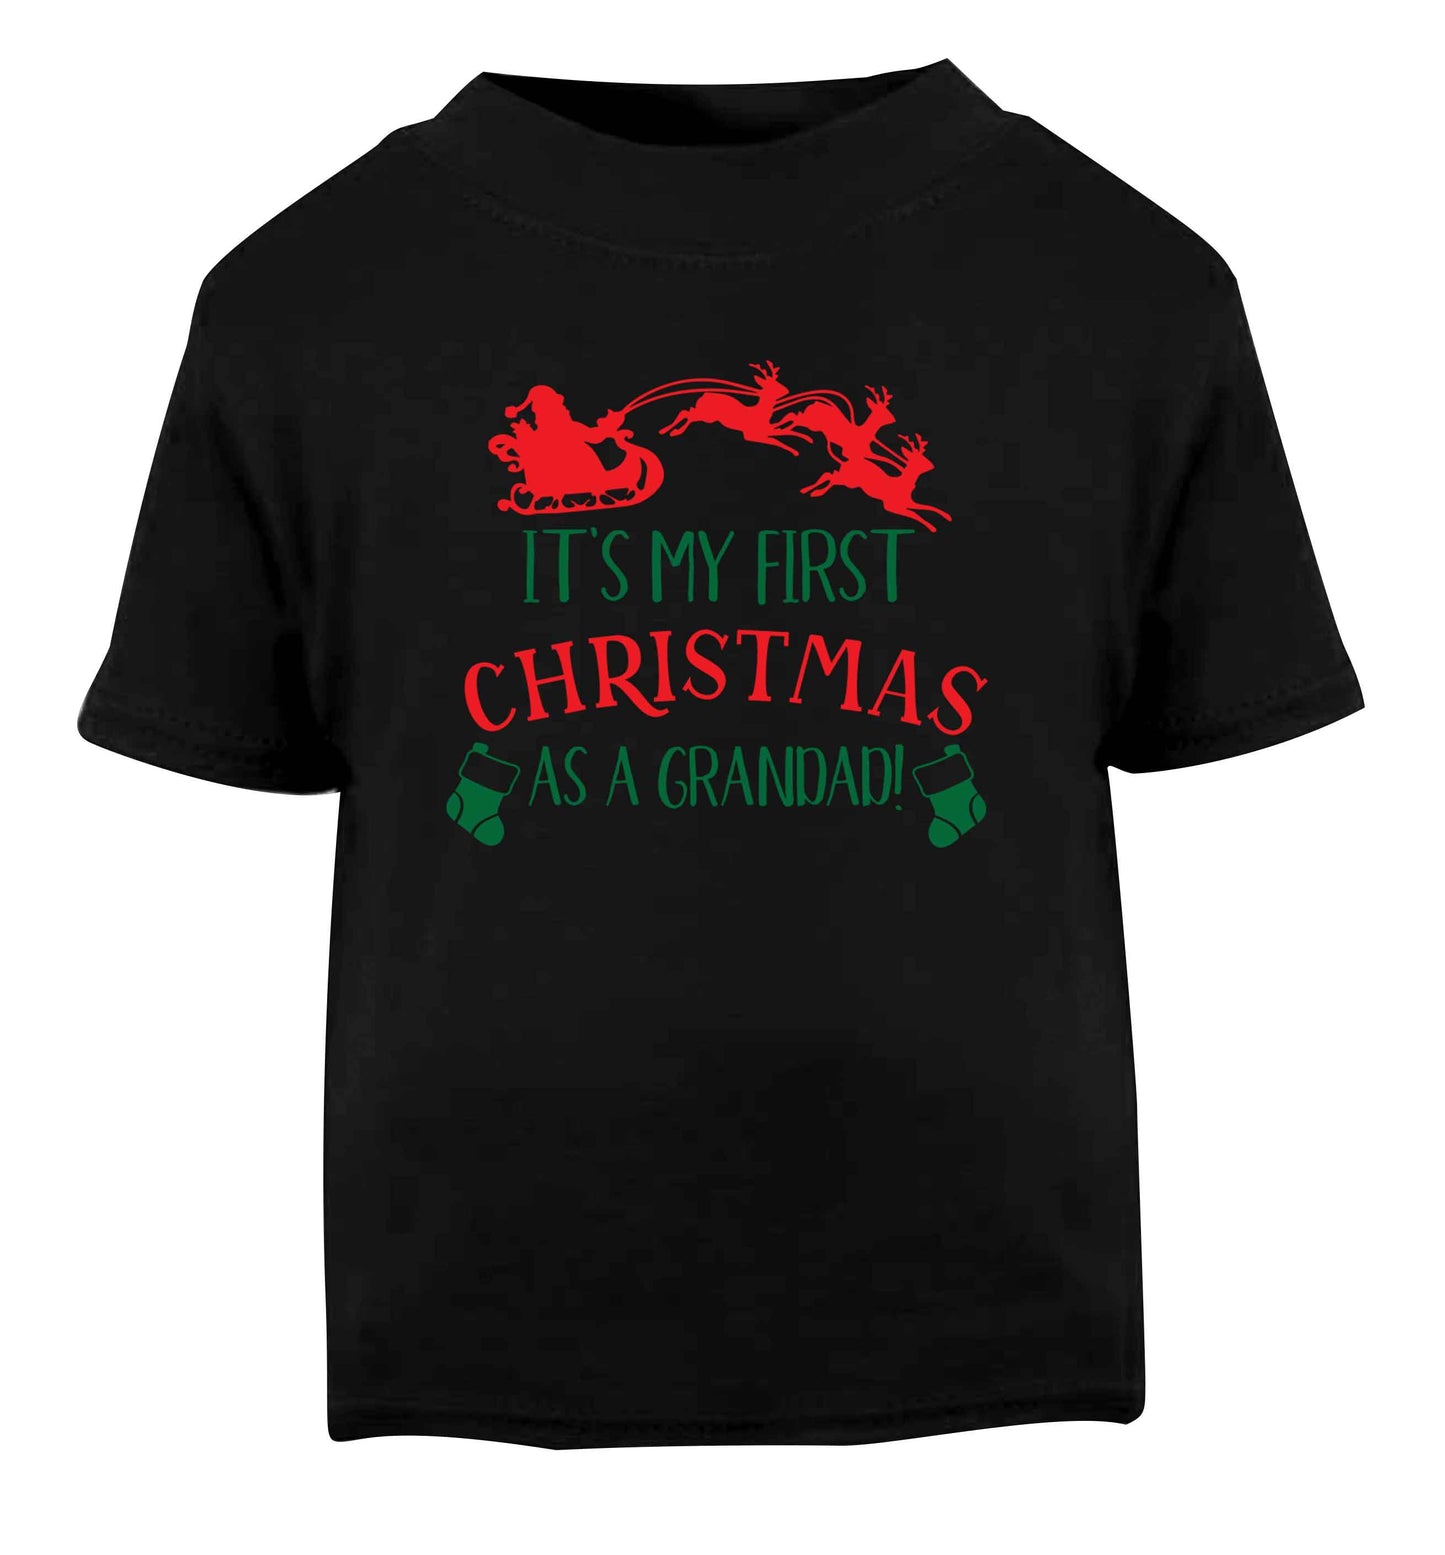 It's my first Christmas as a grandad! Black Baby Toddler Tshirt 2 years